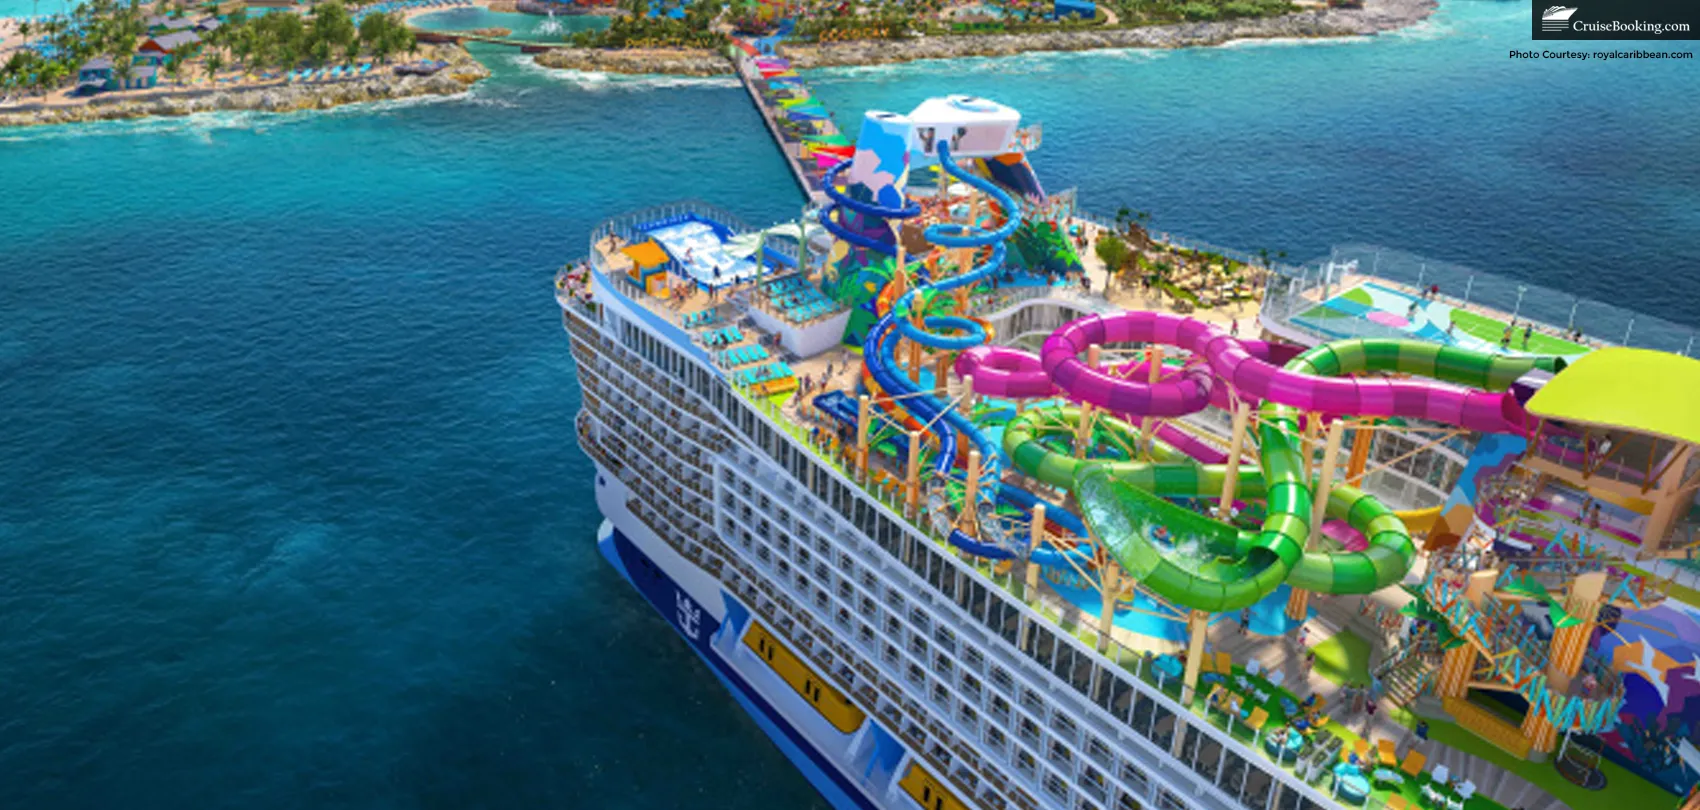 Royal Caribbean’s Star of the Seas to set Sail from Port Canaveral